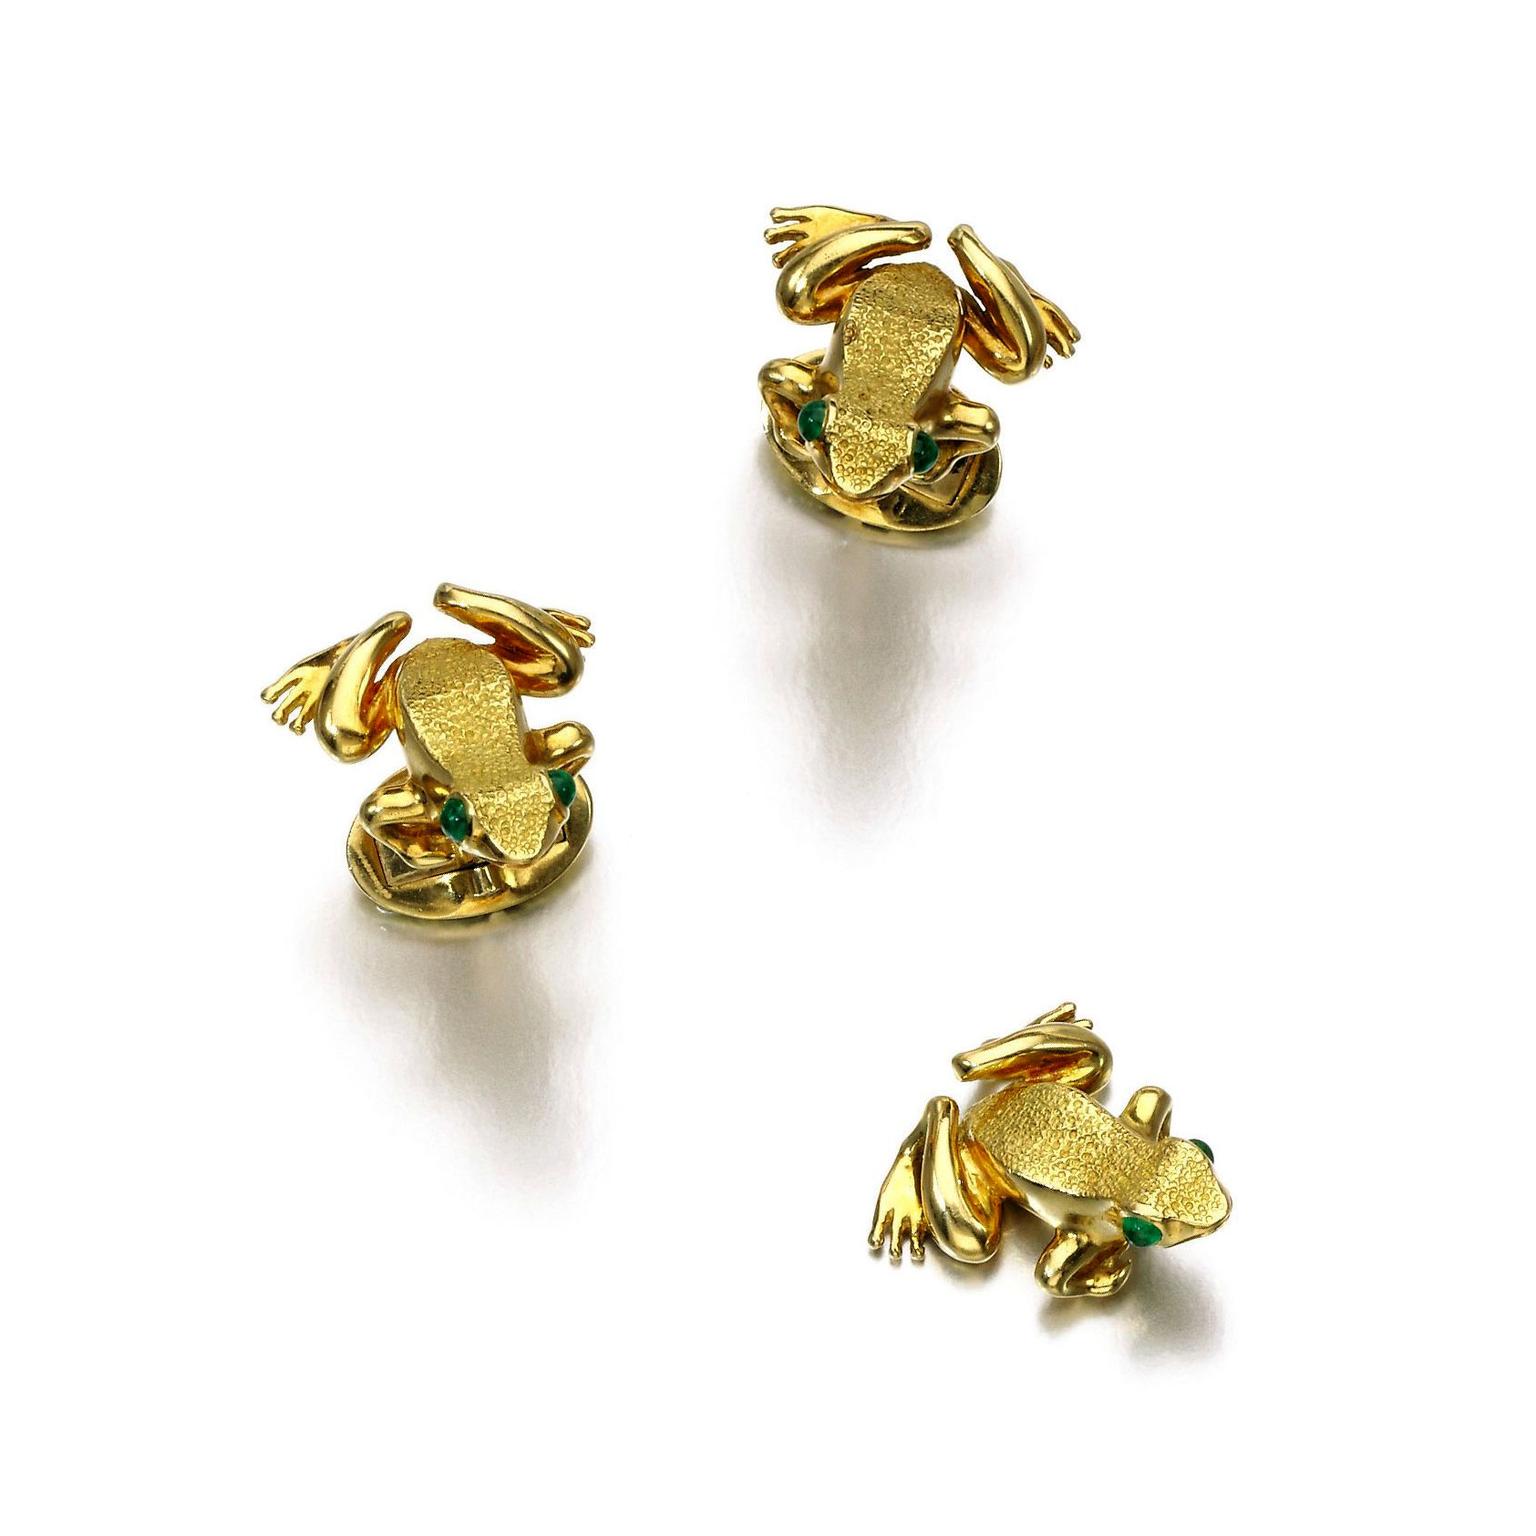 Lot 72 Tiffany Frog cufflinks and tie pin